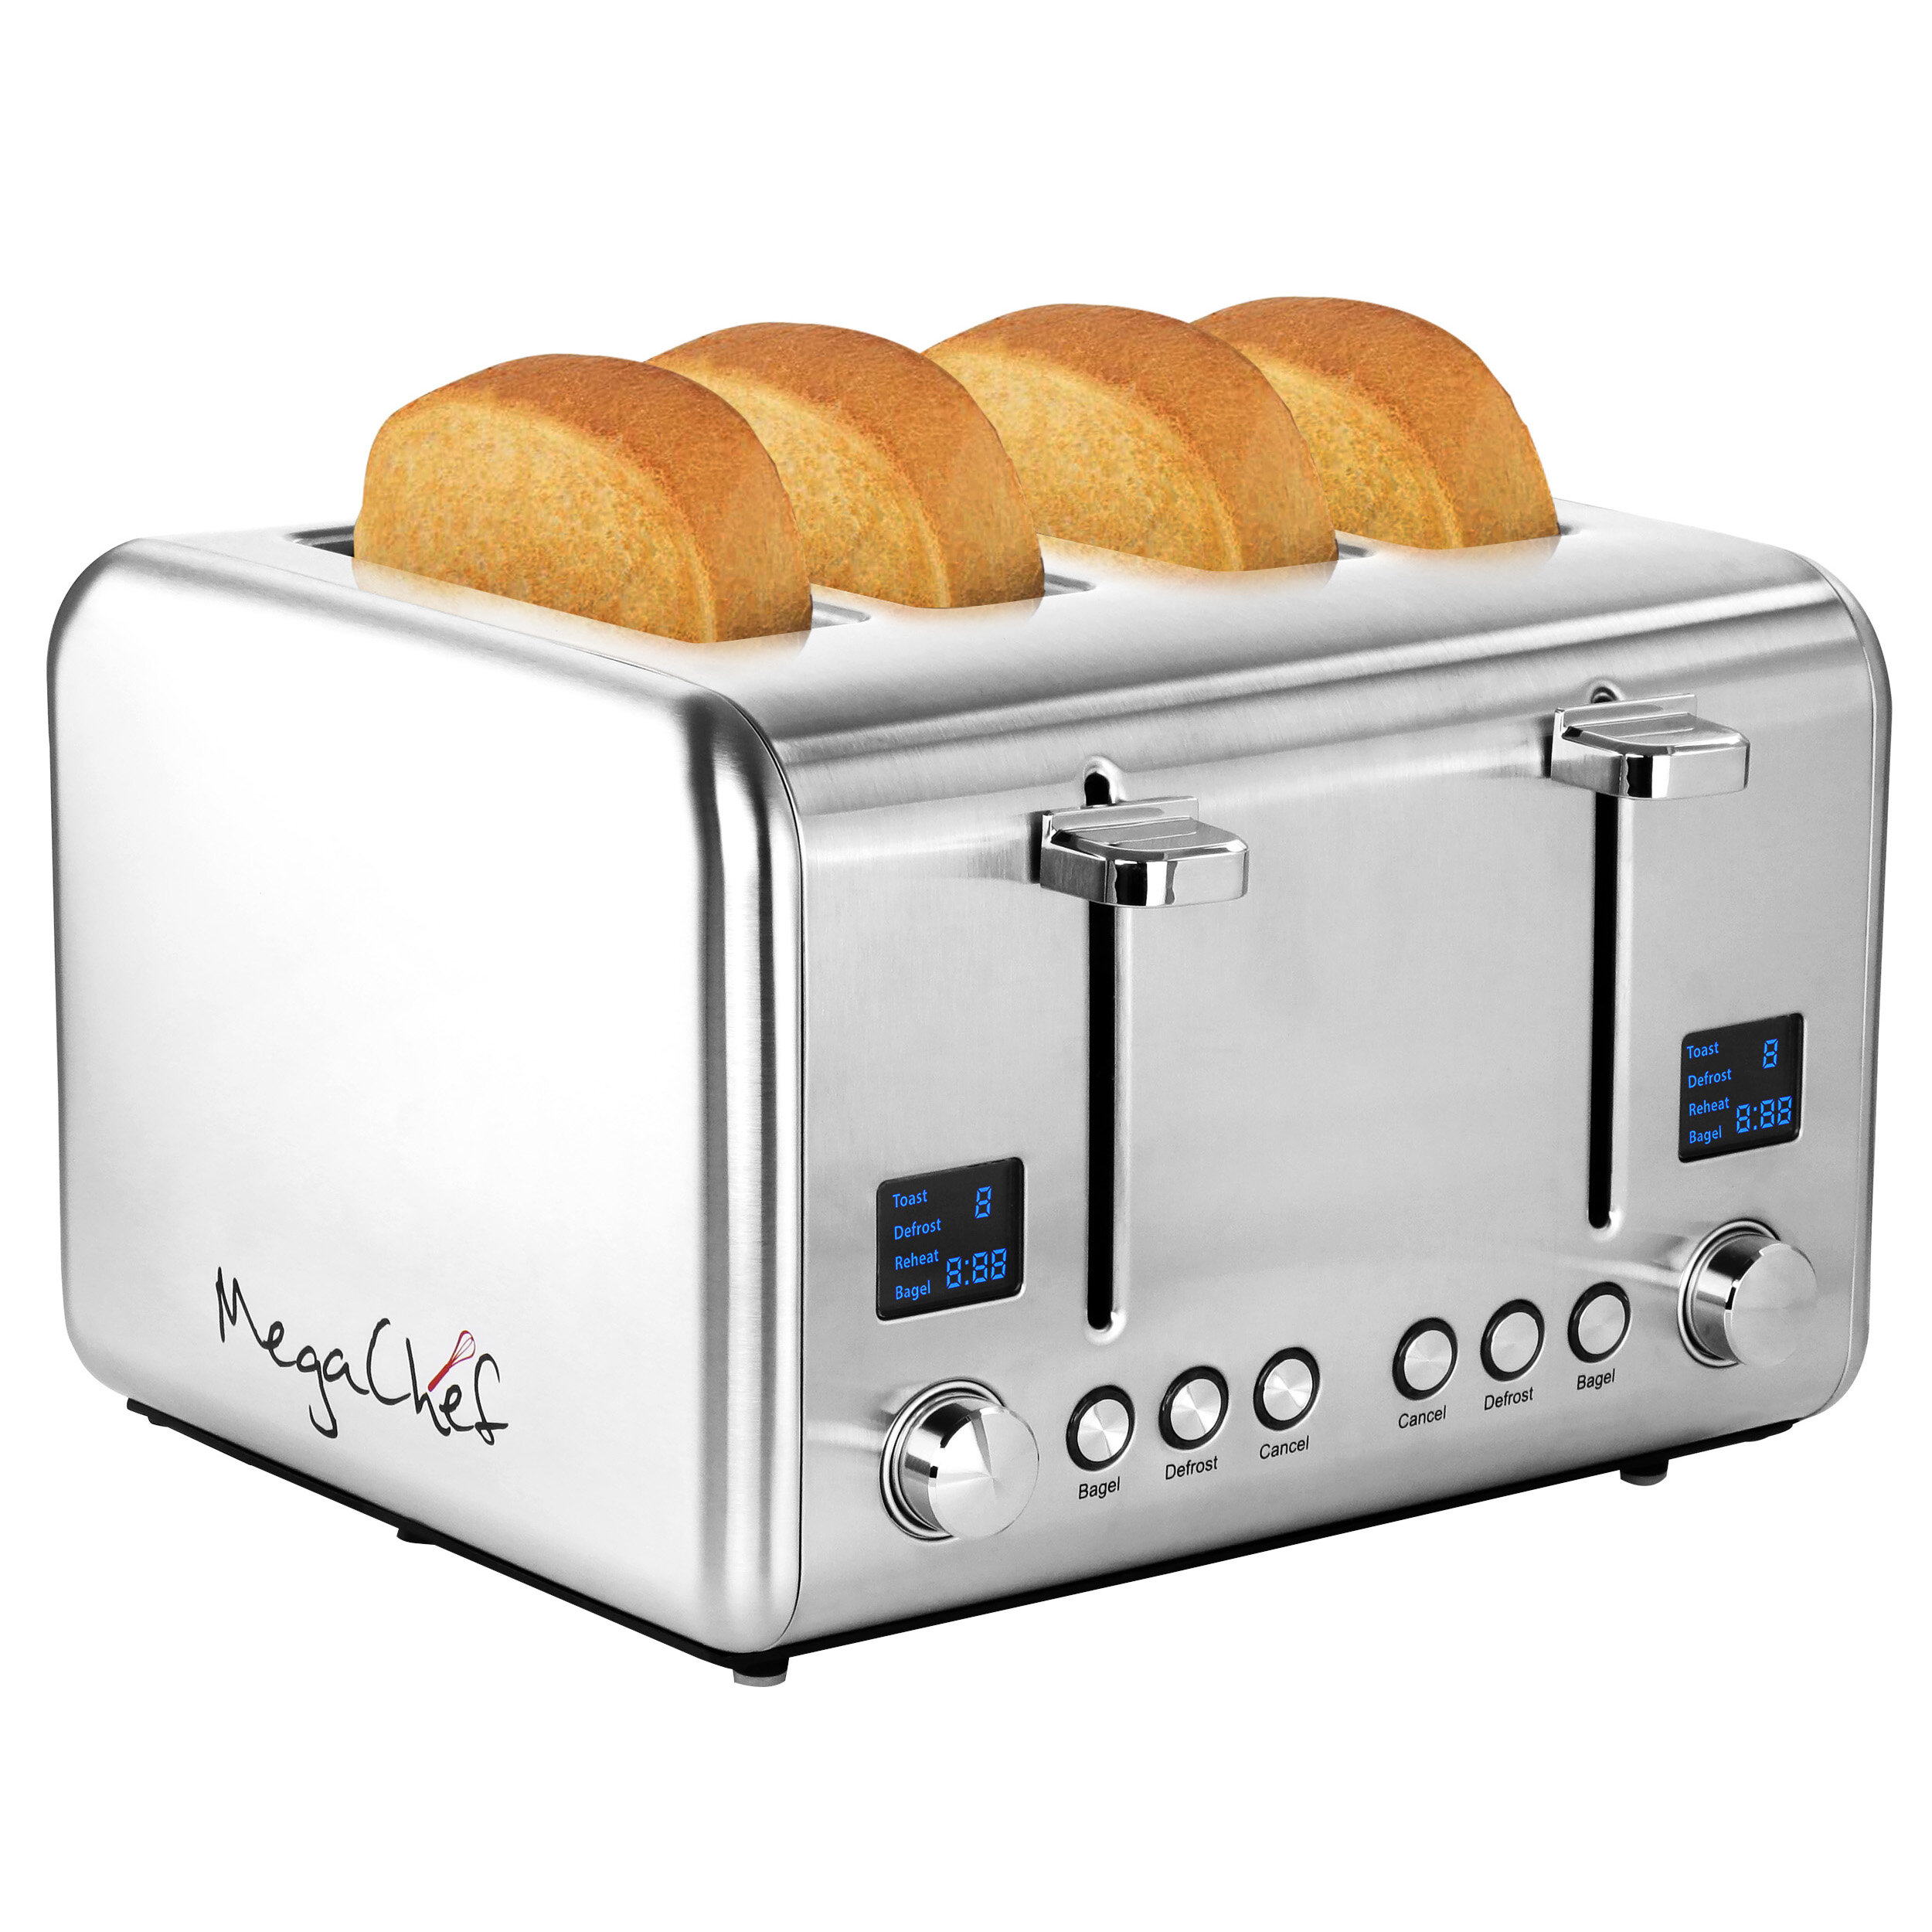 4 Slice Toaster, Long Slot Toasters Best Rated Prime, Stainless Steel Bagel  Toasters with LCD Display, 7 Bread Settings, Bagel/Defrost/Reheat/Cancel